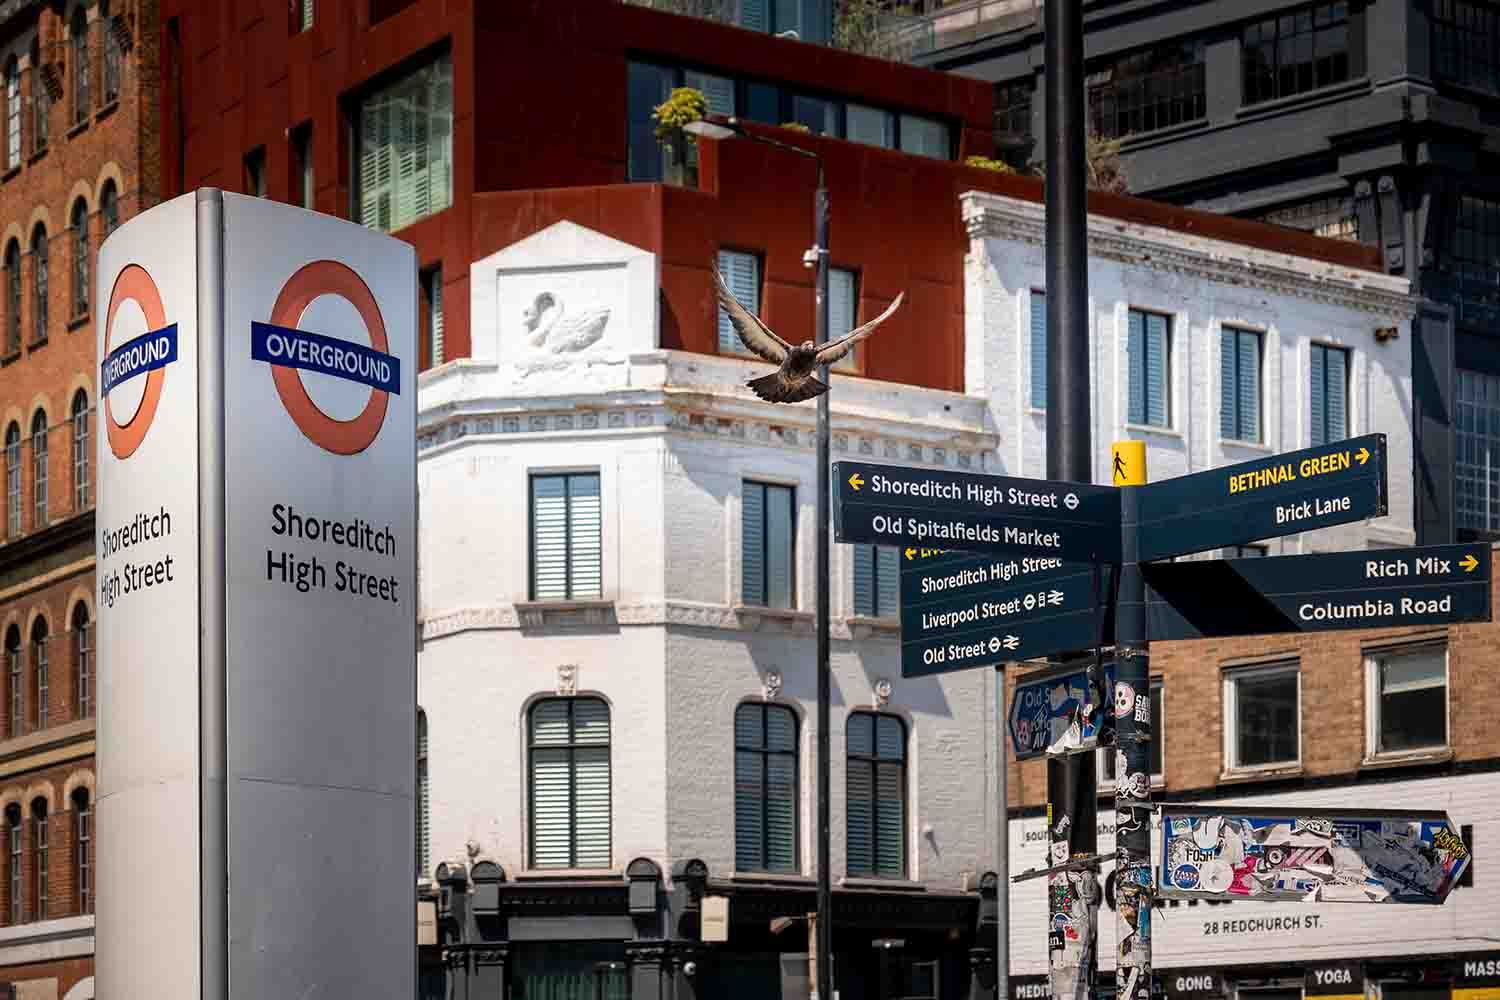 Shoreditch High Street overground station and directional sign post to local attraction in this trendy area of East London